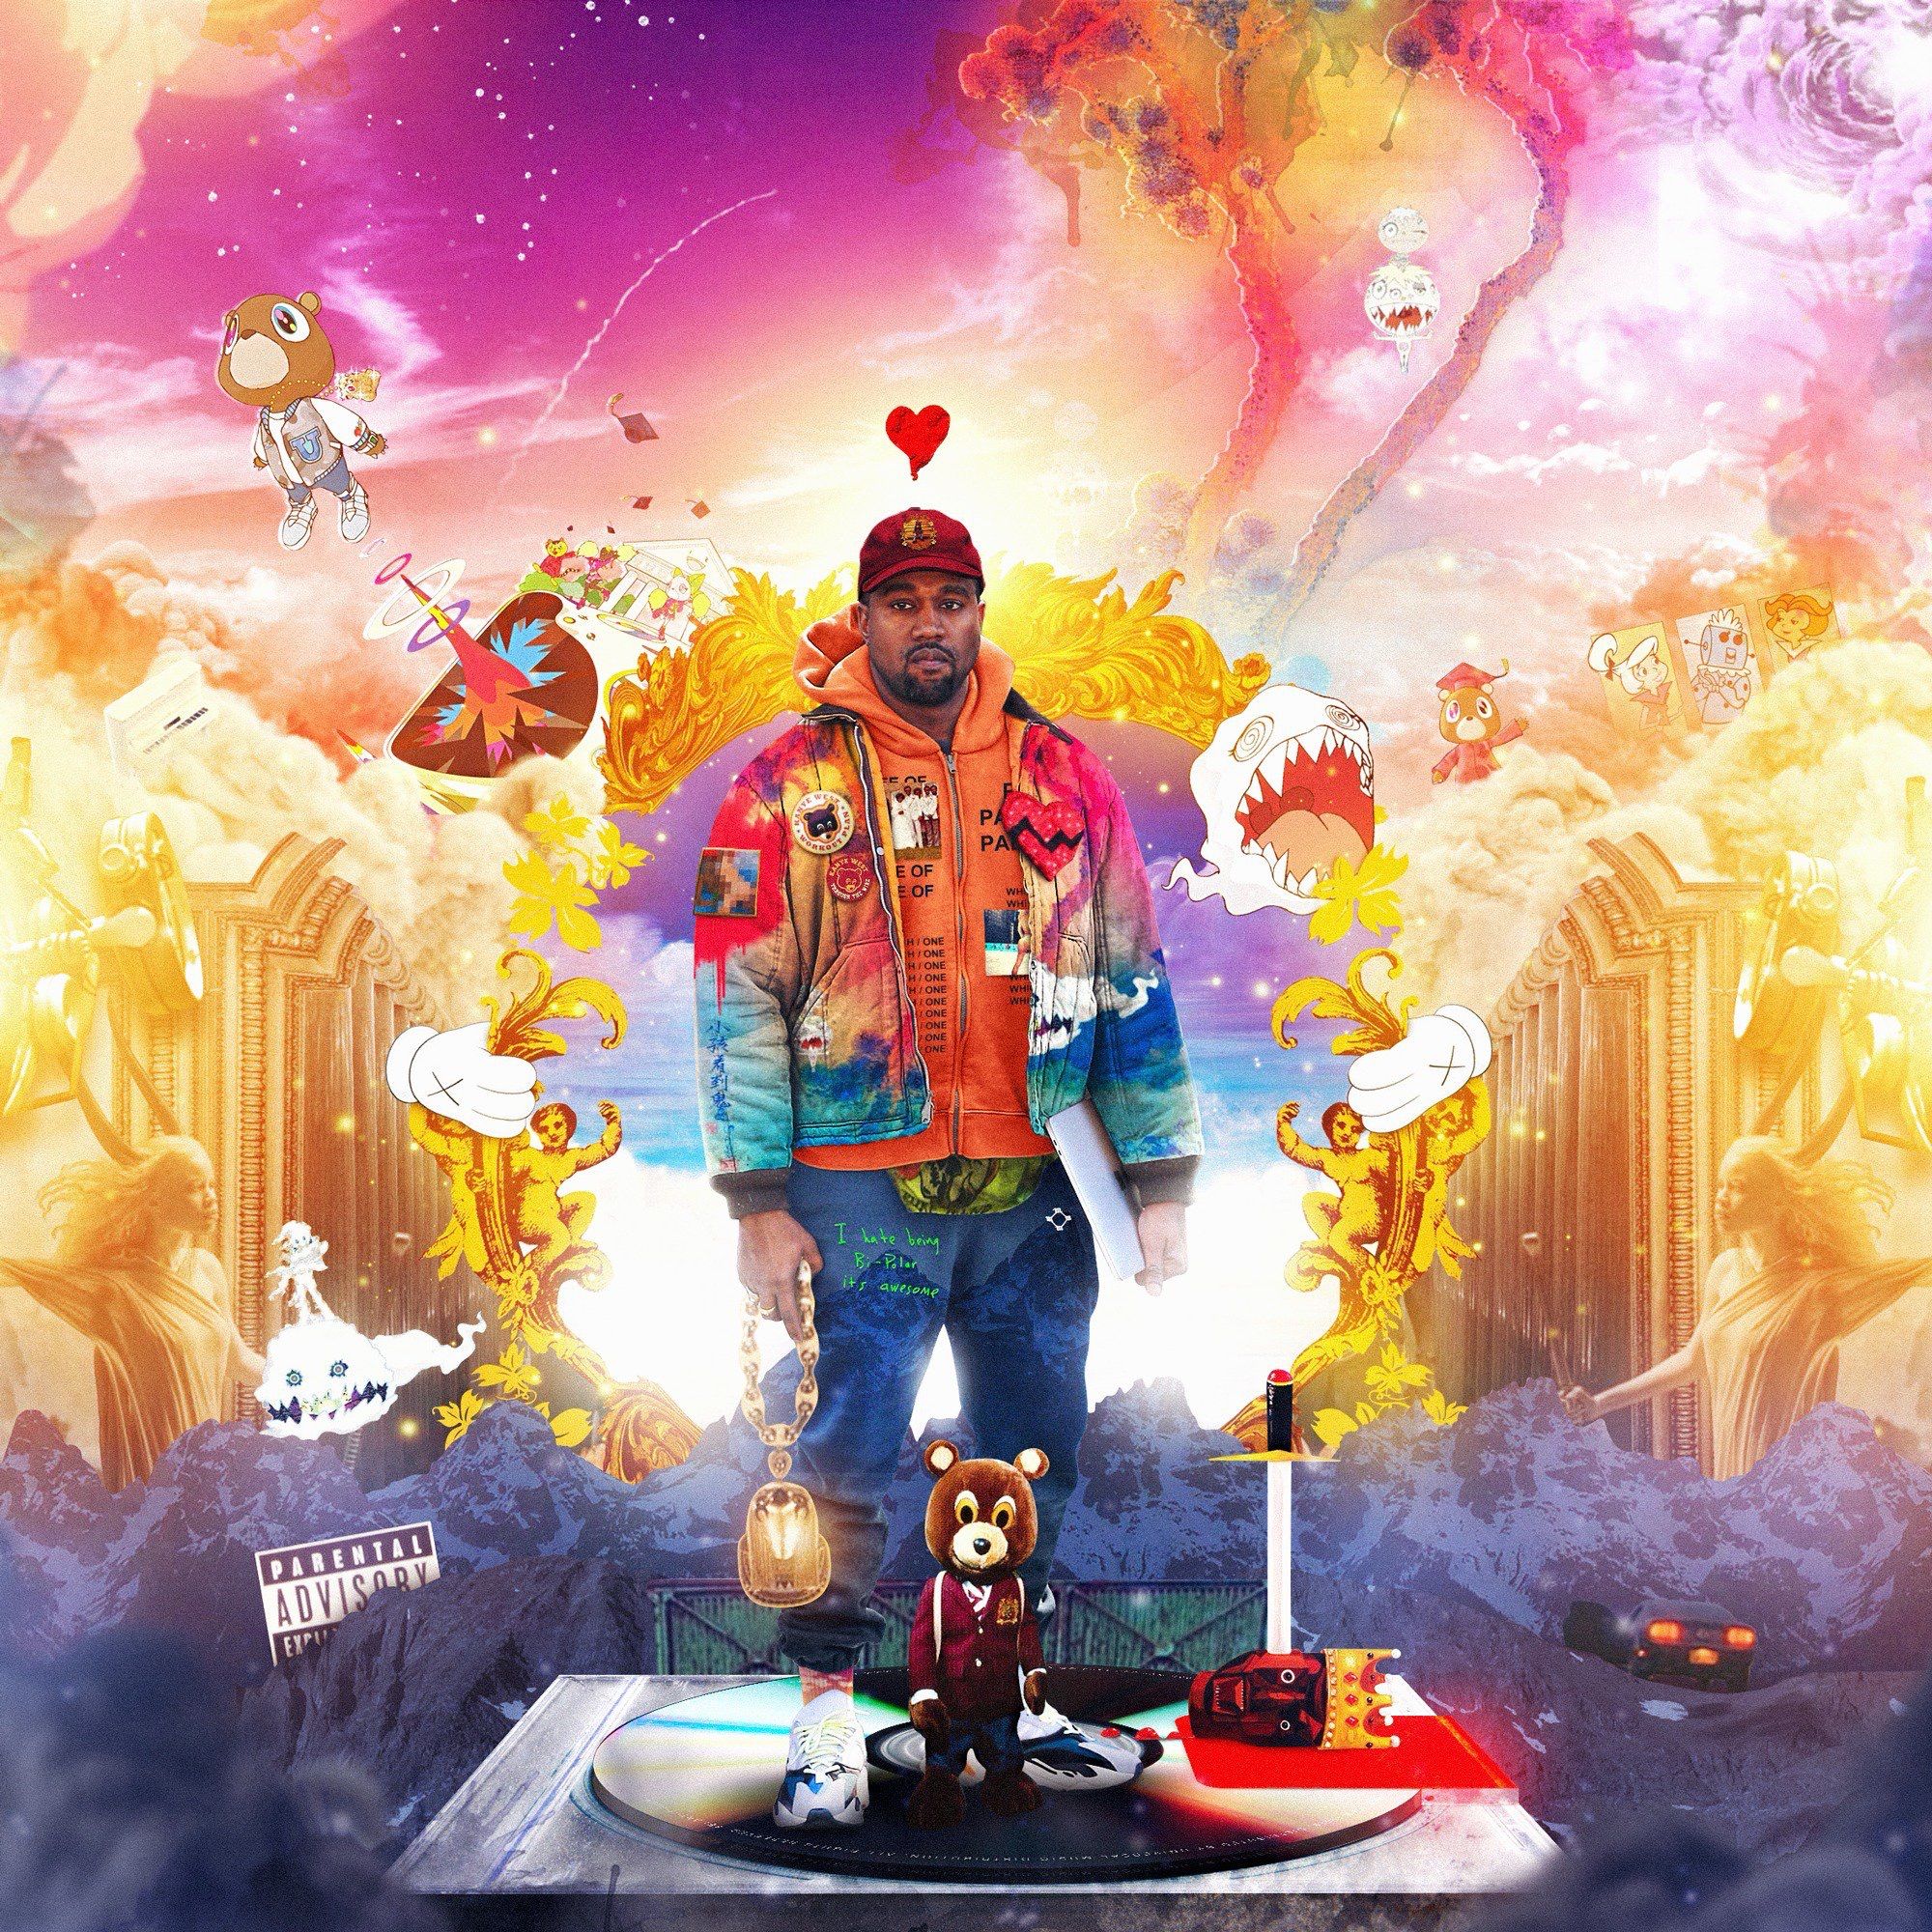 Kanye West All Albums Poster - HD Wallpaper 